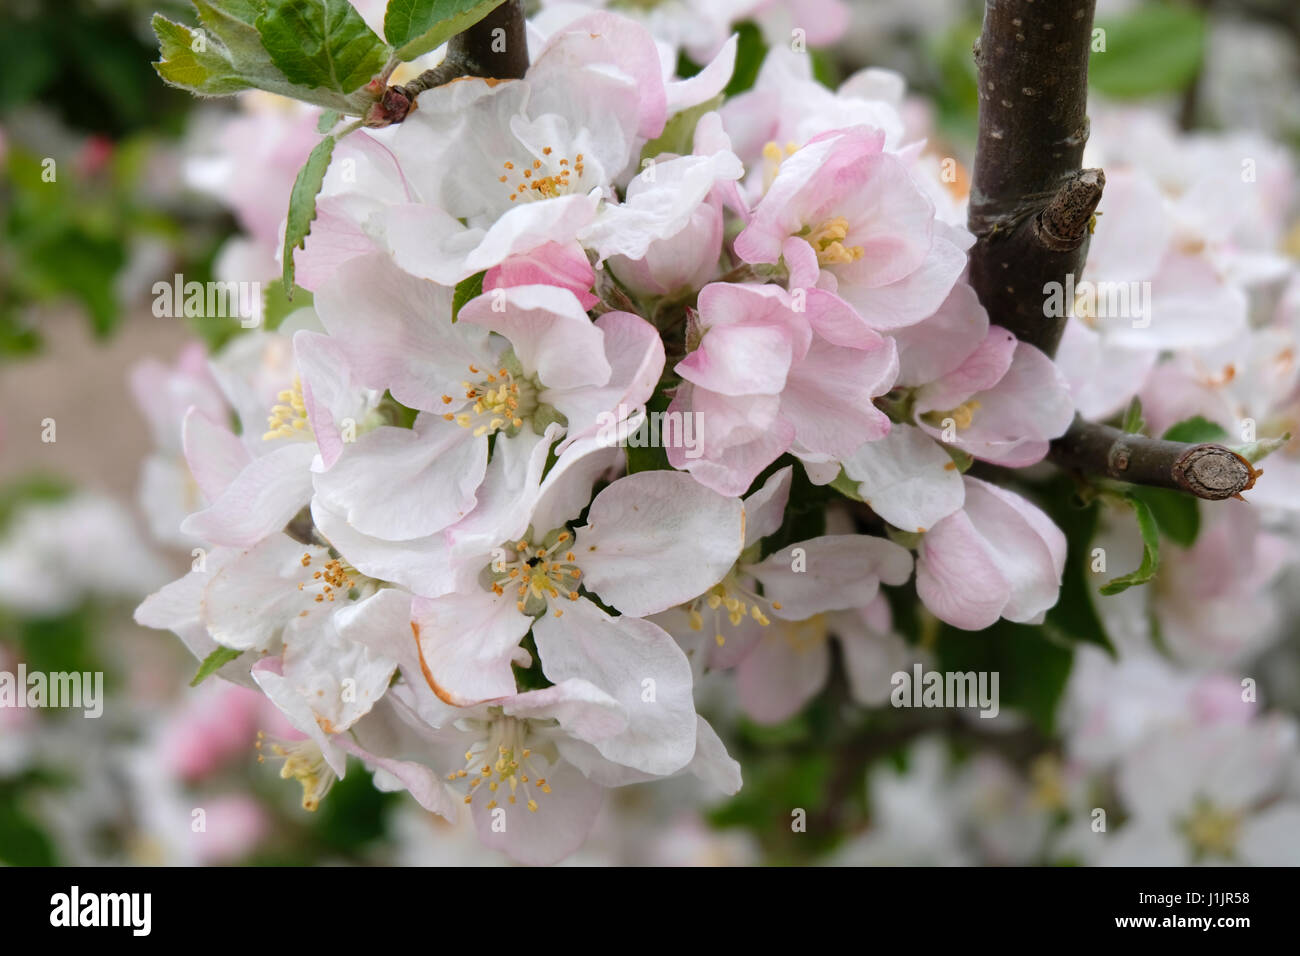 Sussex, UK White Apple blossom tinged with pink on tree in Spring Stock Photo